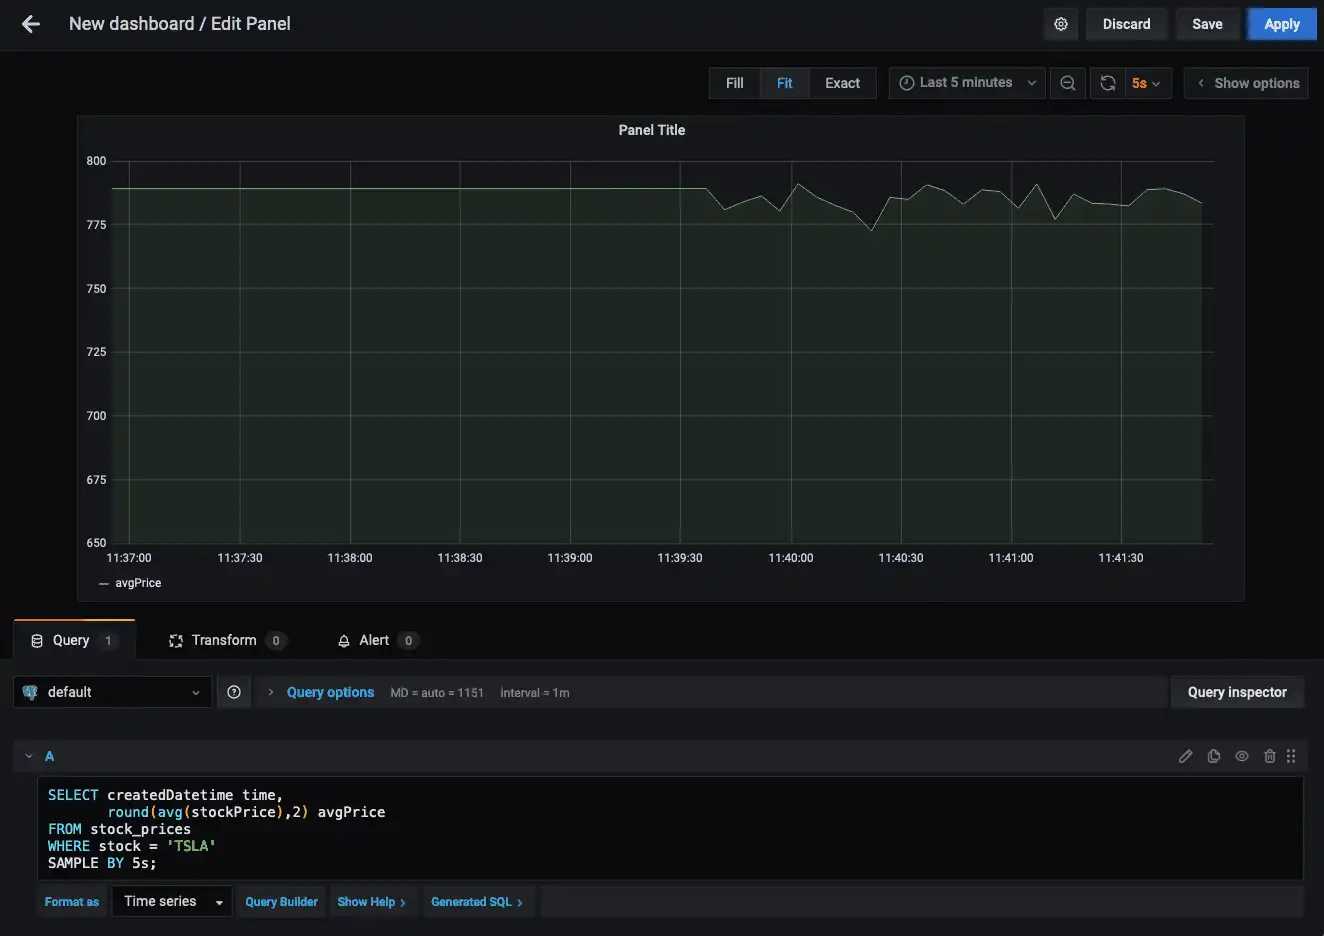 A dashboard in Grafana showing Tesla stock price over time